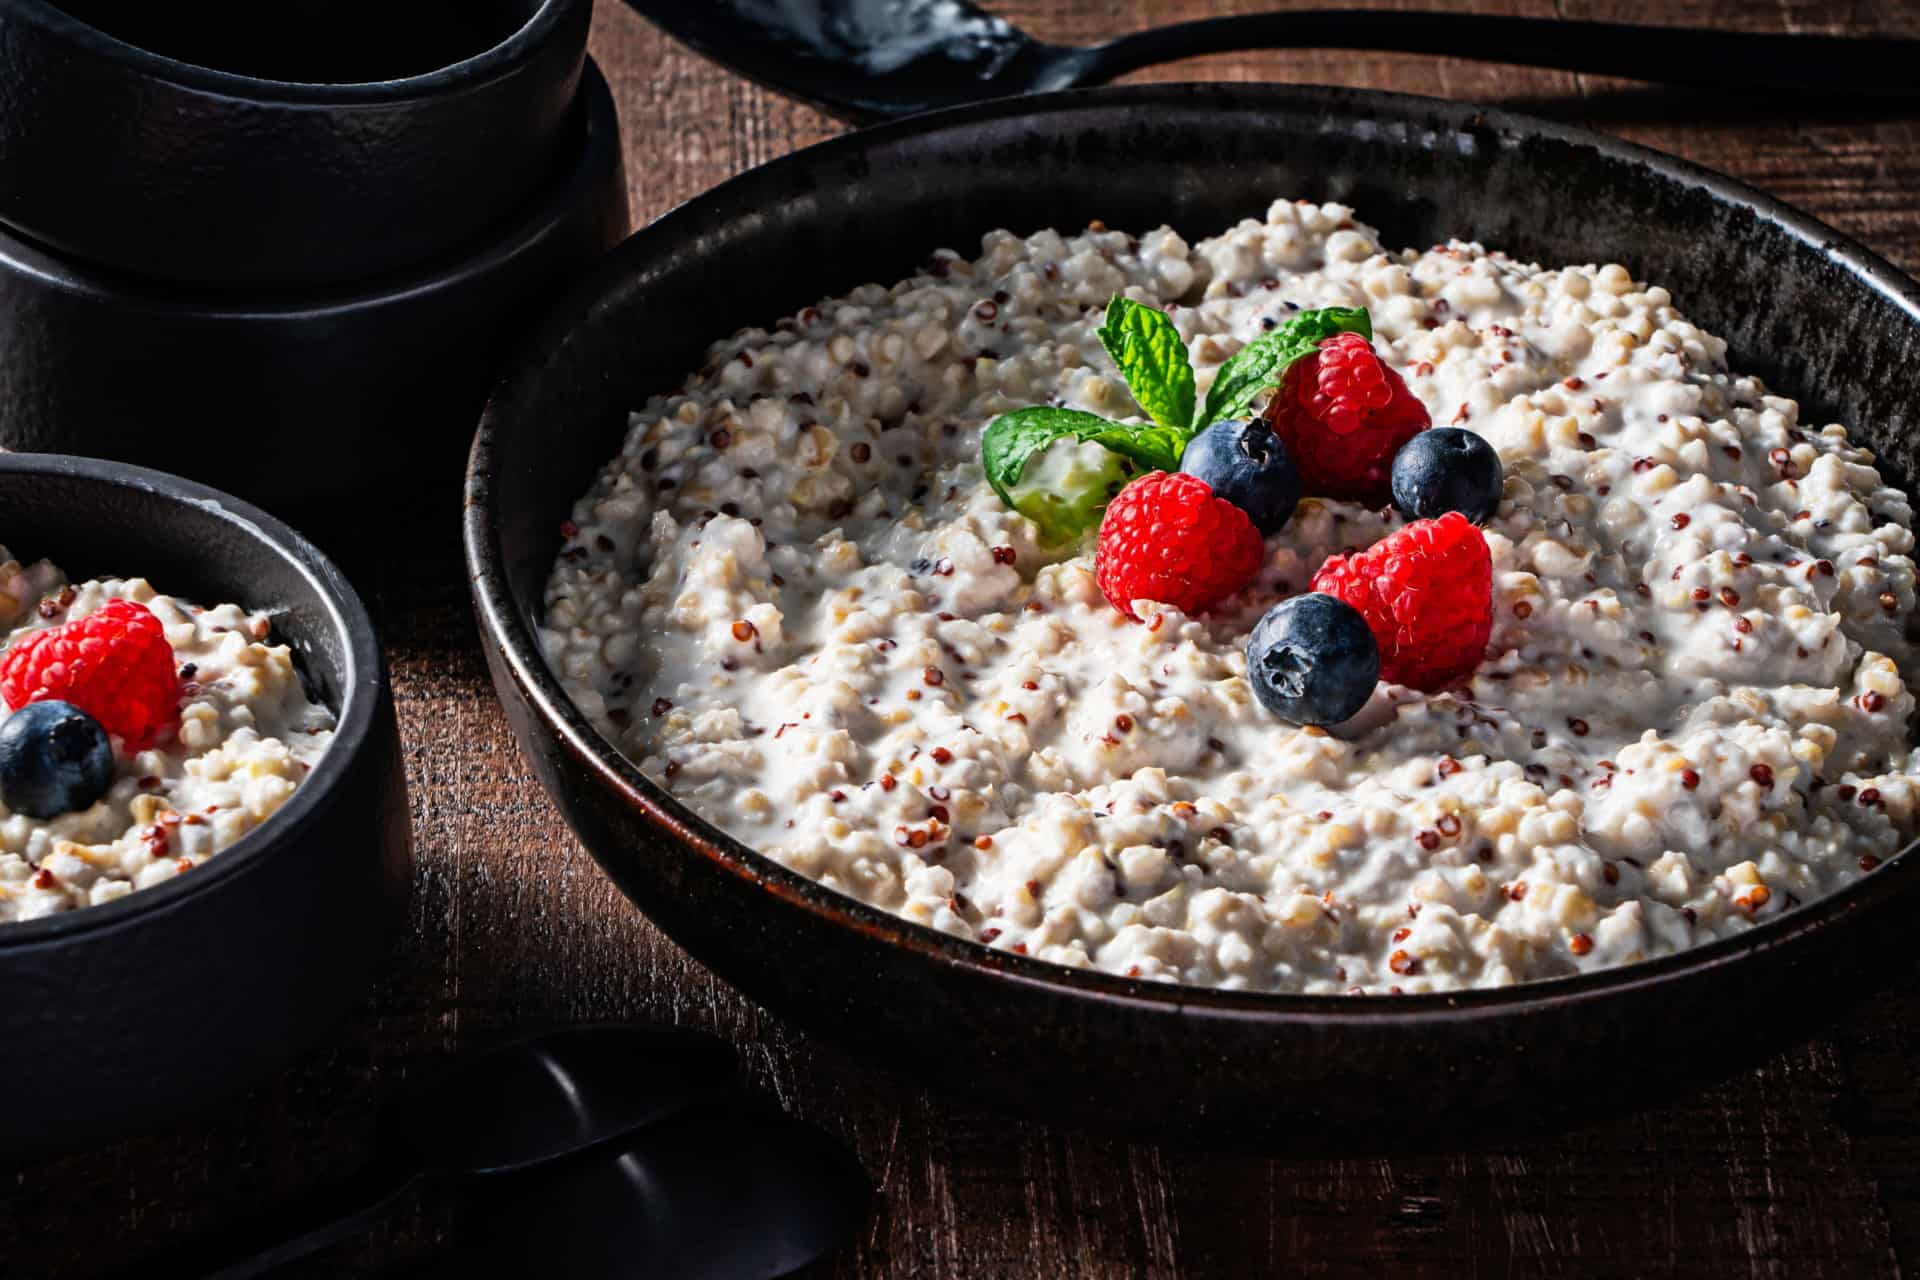 oatmeal and red quinoa in bowl with berries on top